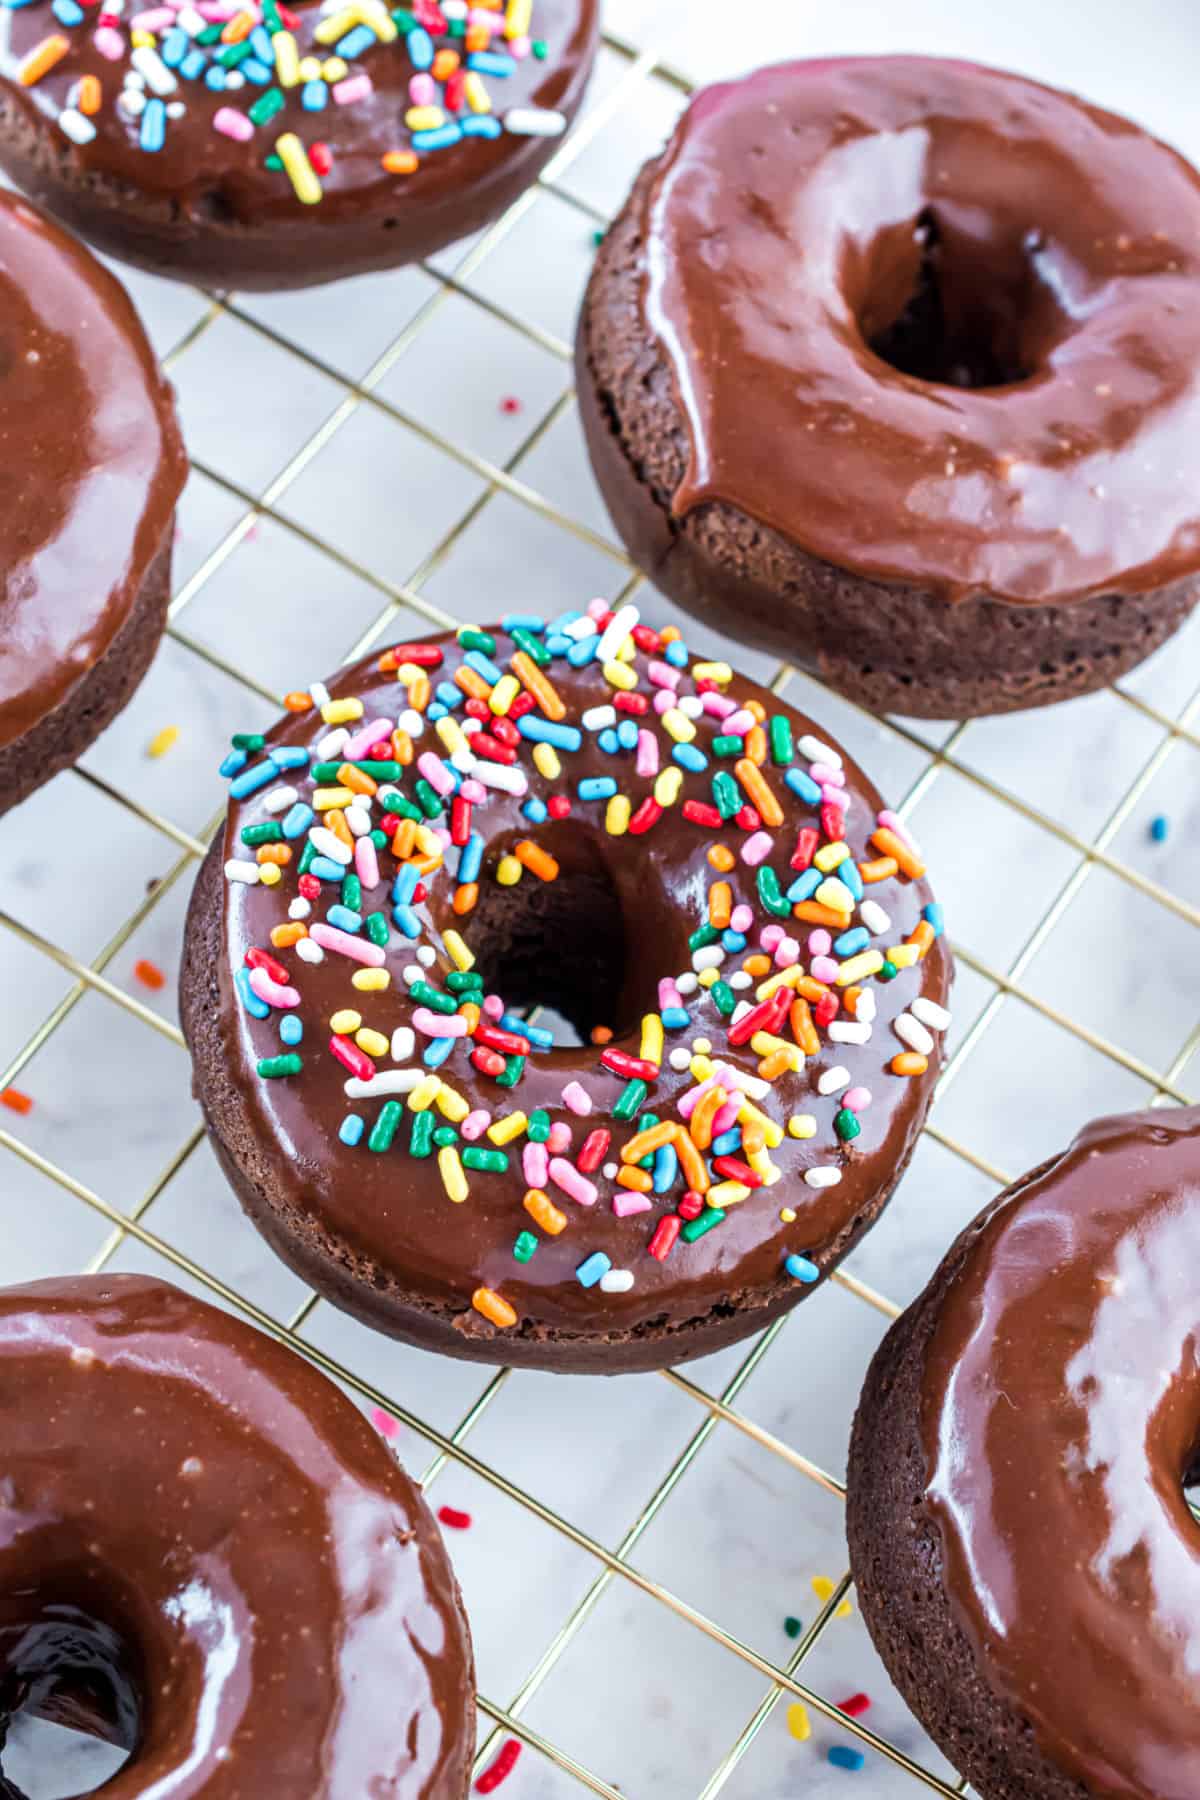 Baked chocolate donuts with chocolate glaze and sprinkles.